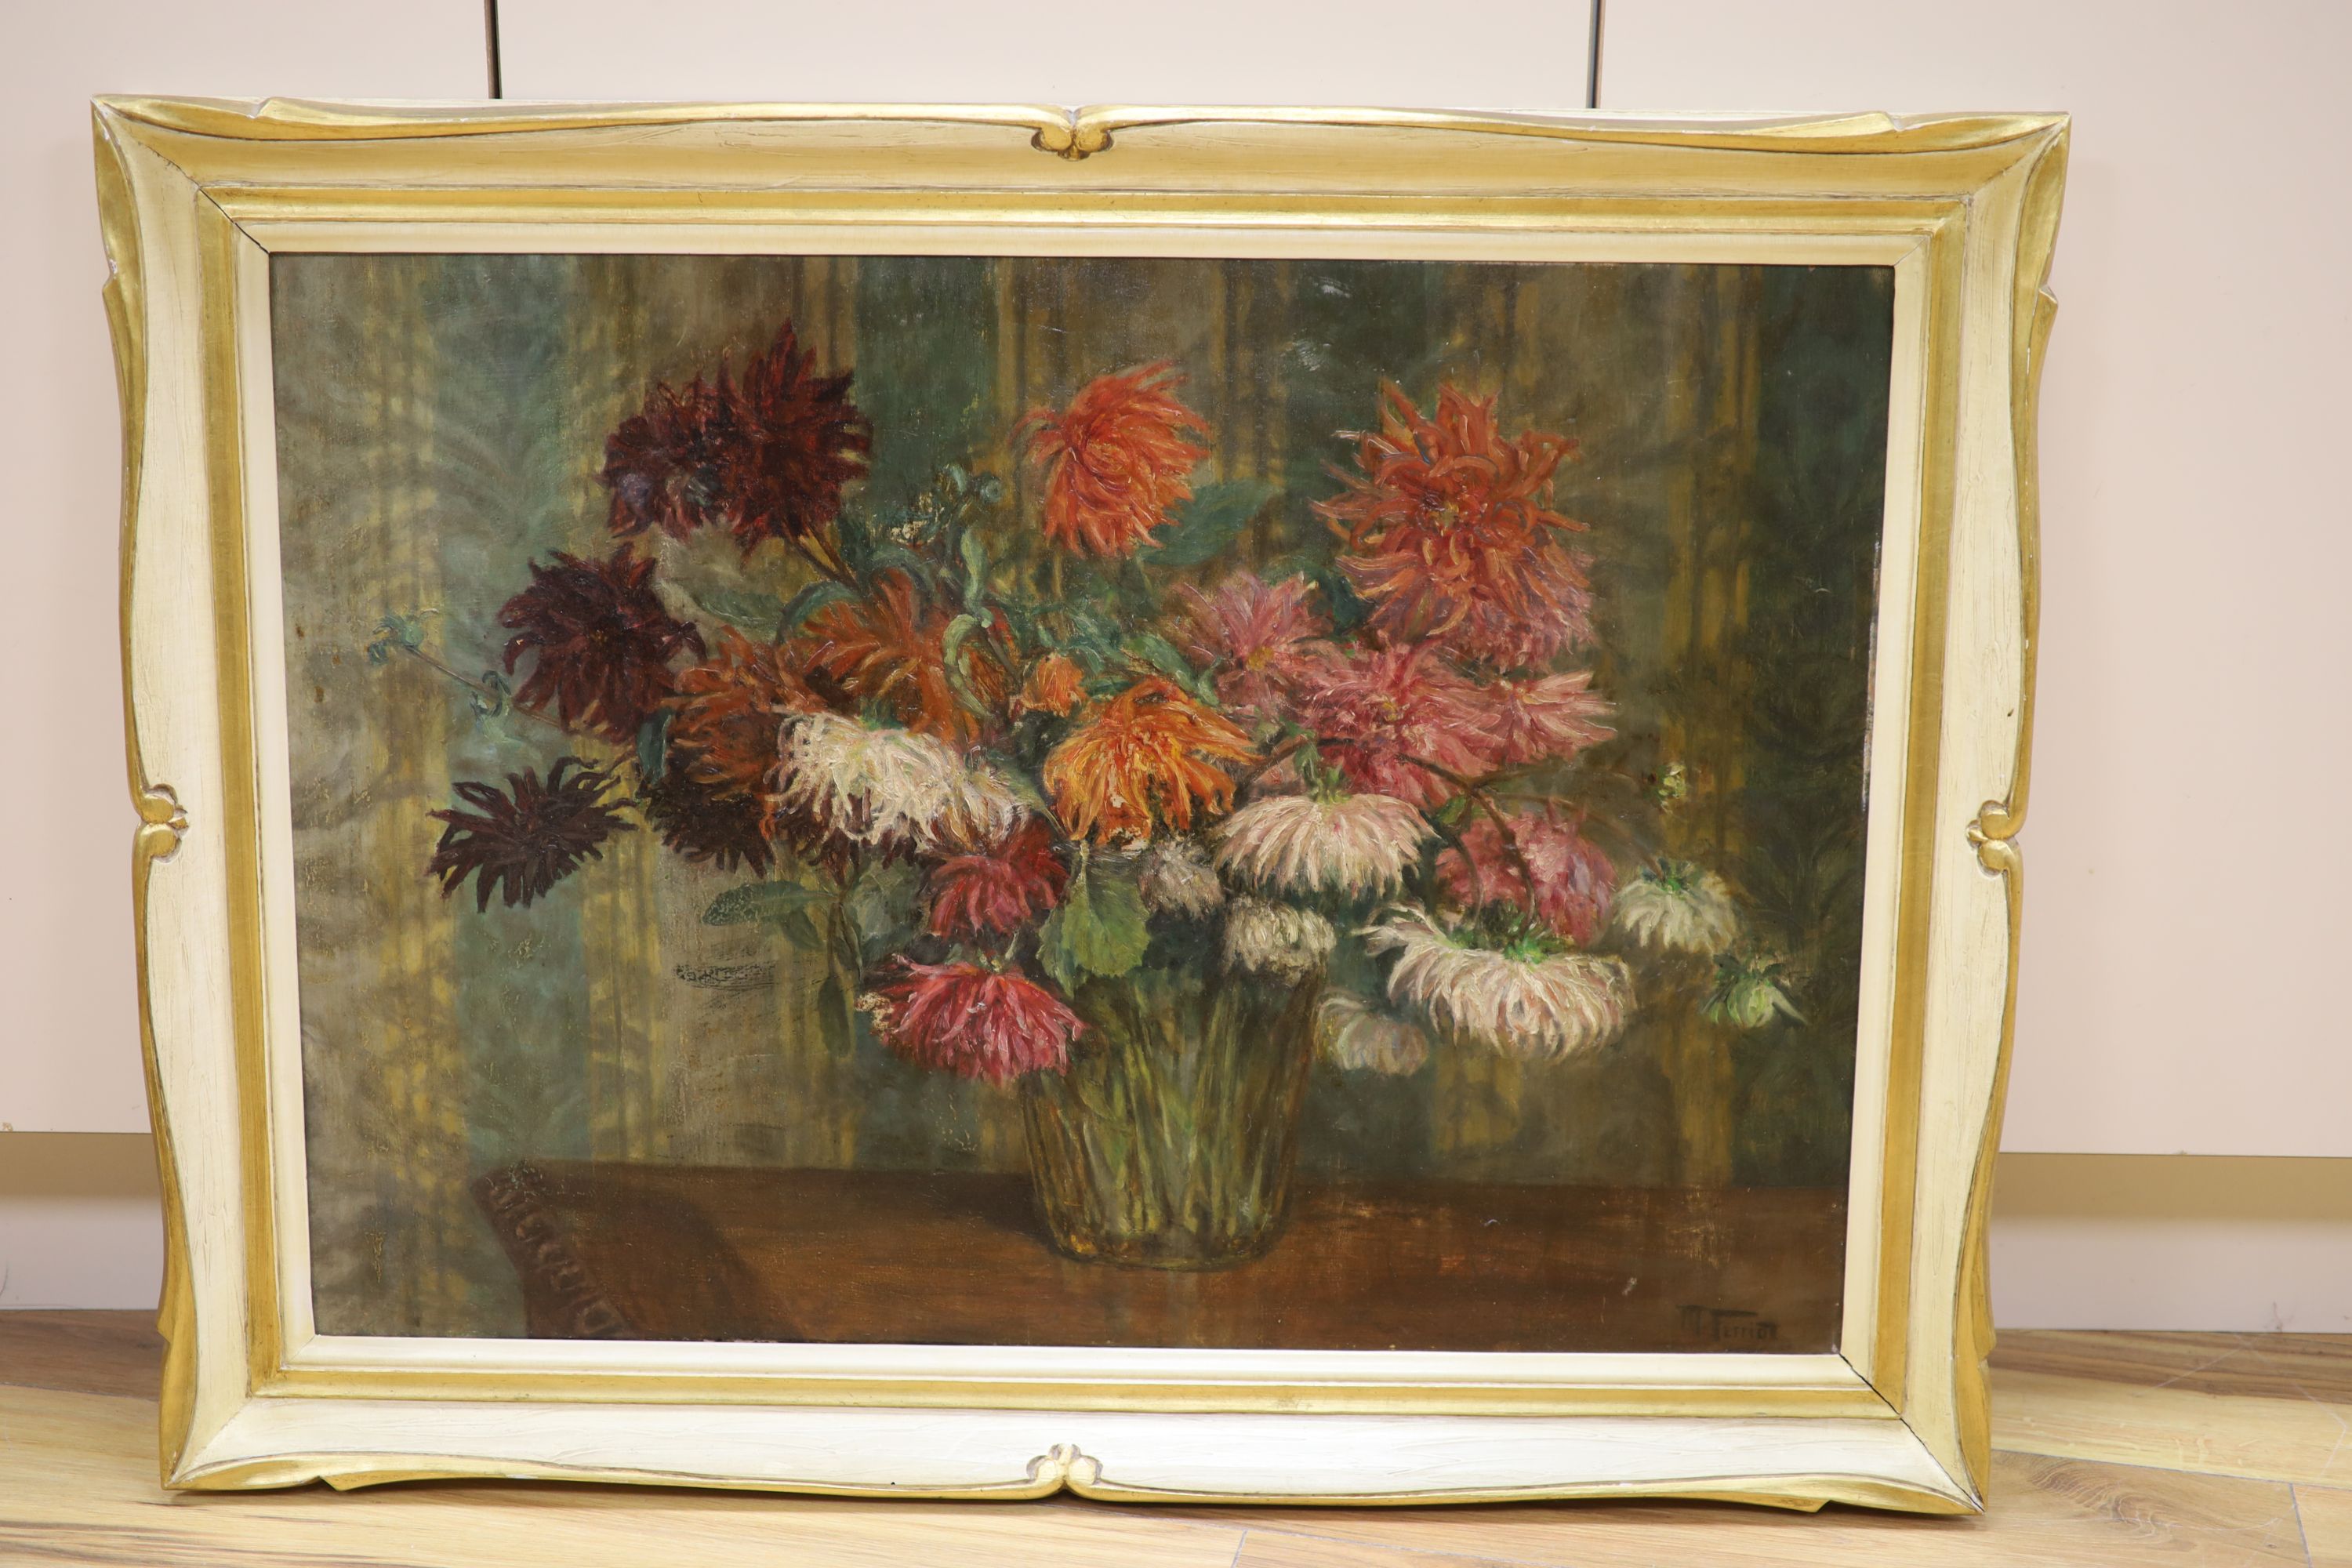 Early 20th century continental school, a still life study of dahlias, oil on board, signed lower right, 52 x 75 cm.